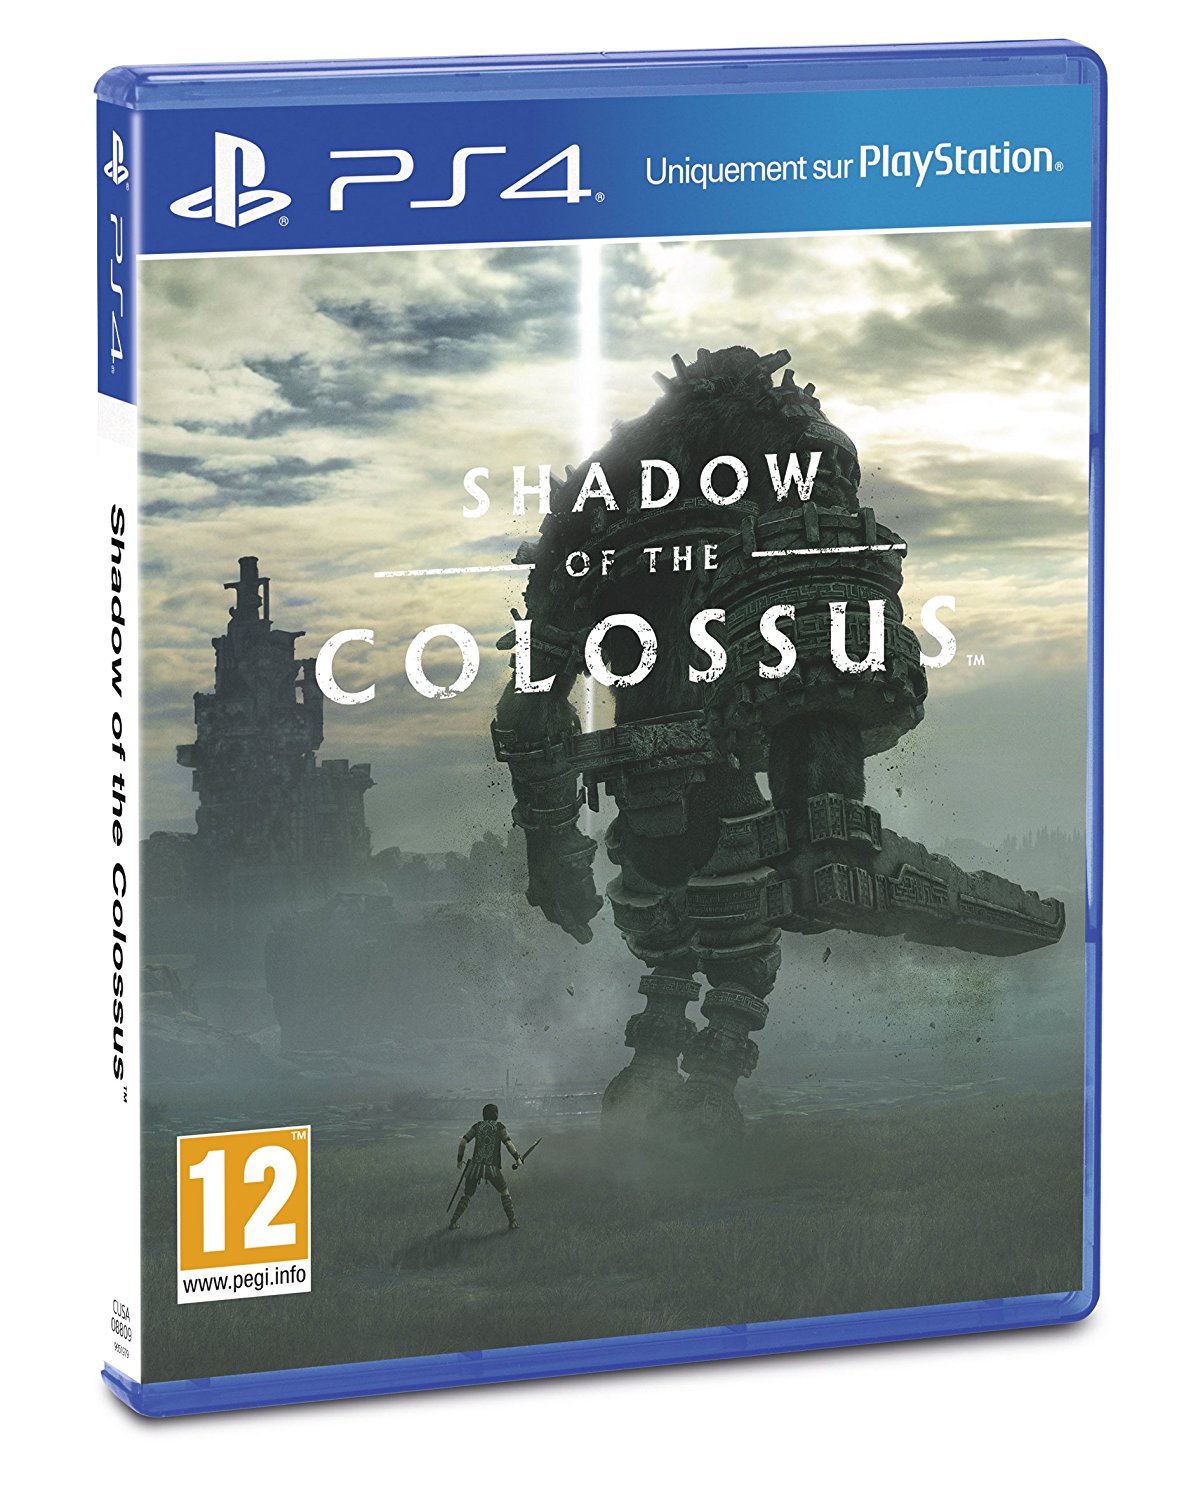 Jeu PS4 Shadow of the Colossus